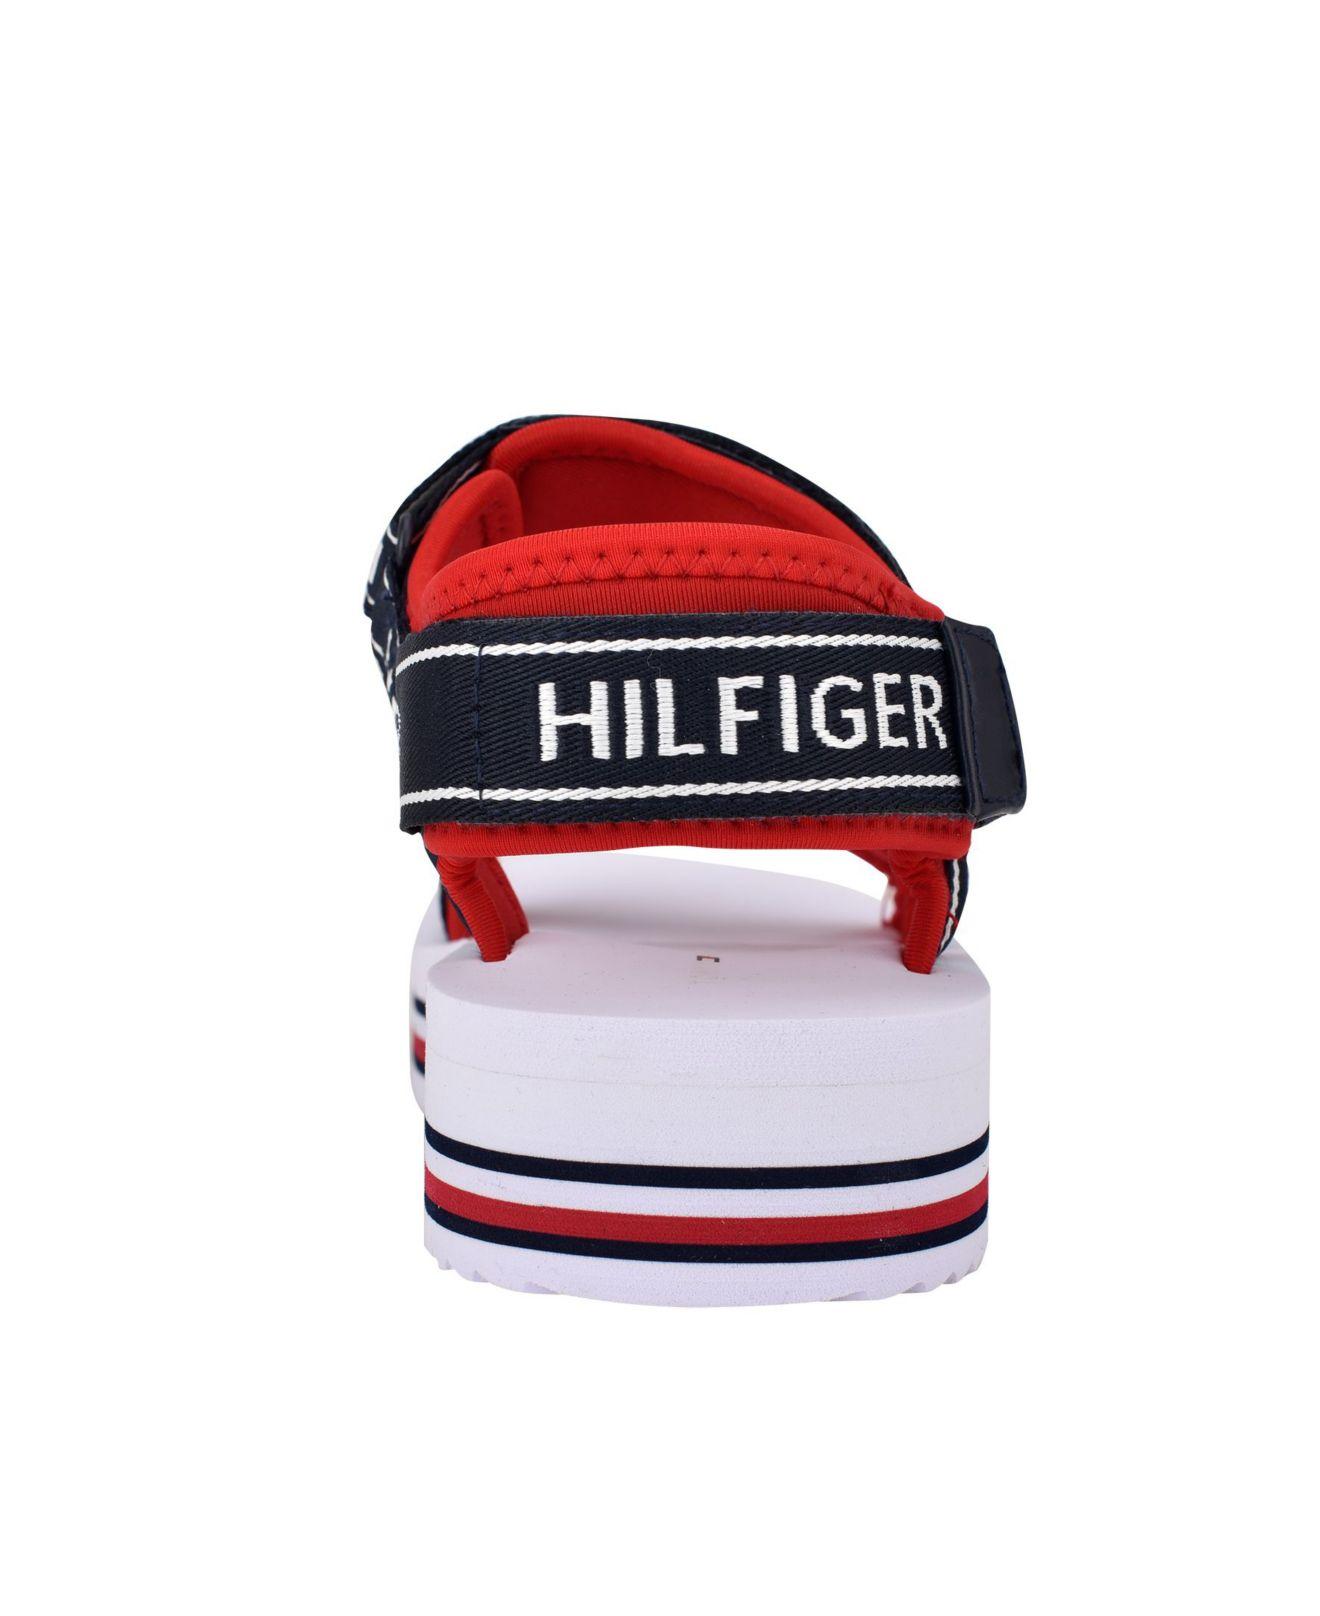 Tommy Hilfiger Olly Red Hook and Loop Rounded Toe Cozy Fashion